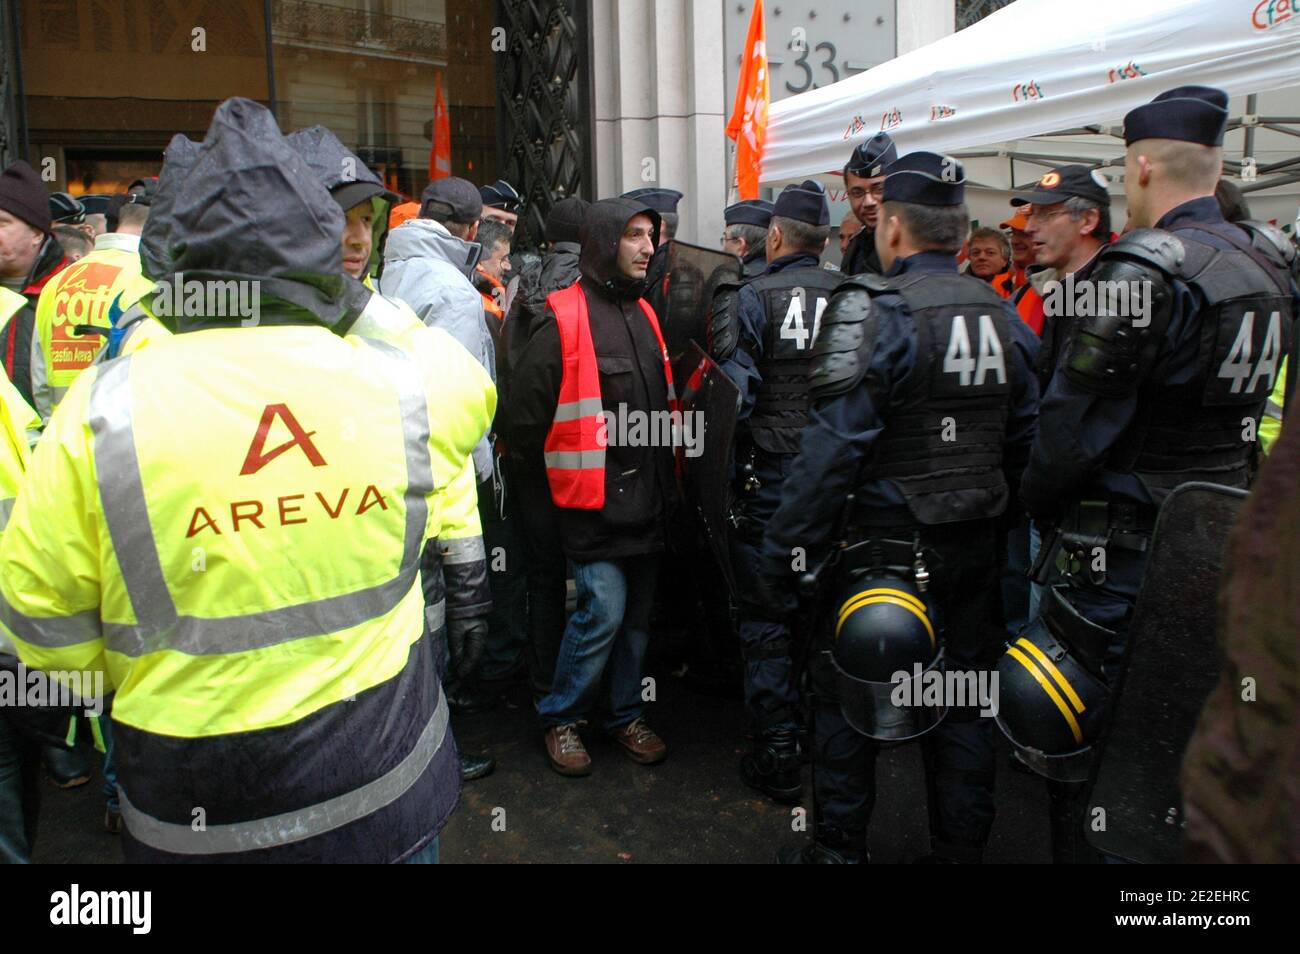 Workers of French nuclear engineering company Areva demonstrate outside the company's headquarters, in Paris, France on December 7, 2011. Employees from several French nuclear plants are mainly demanding higher salaries. Photo by Alain Apaydin/ABACAPRESS.COM Stock Photo